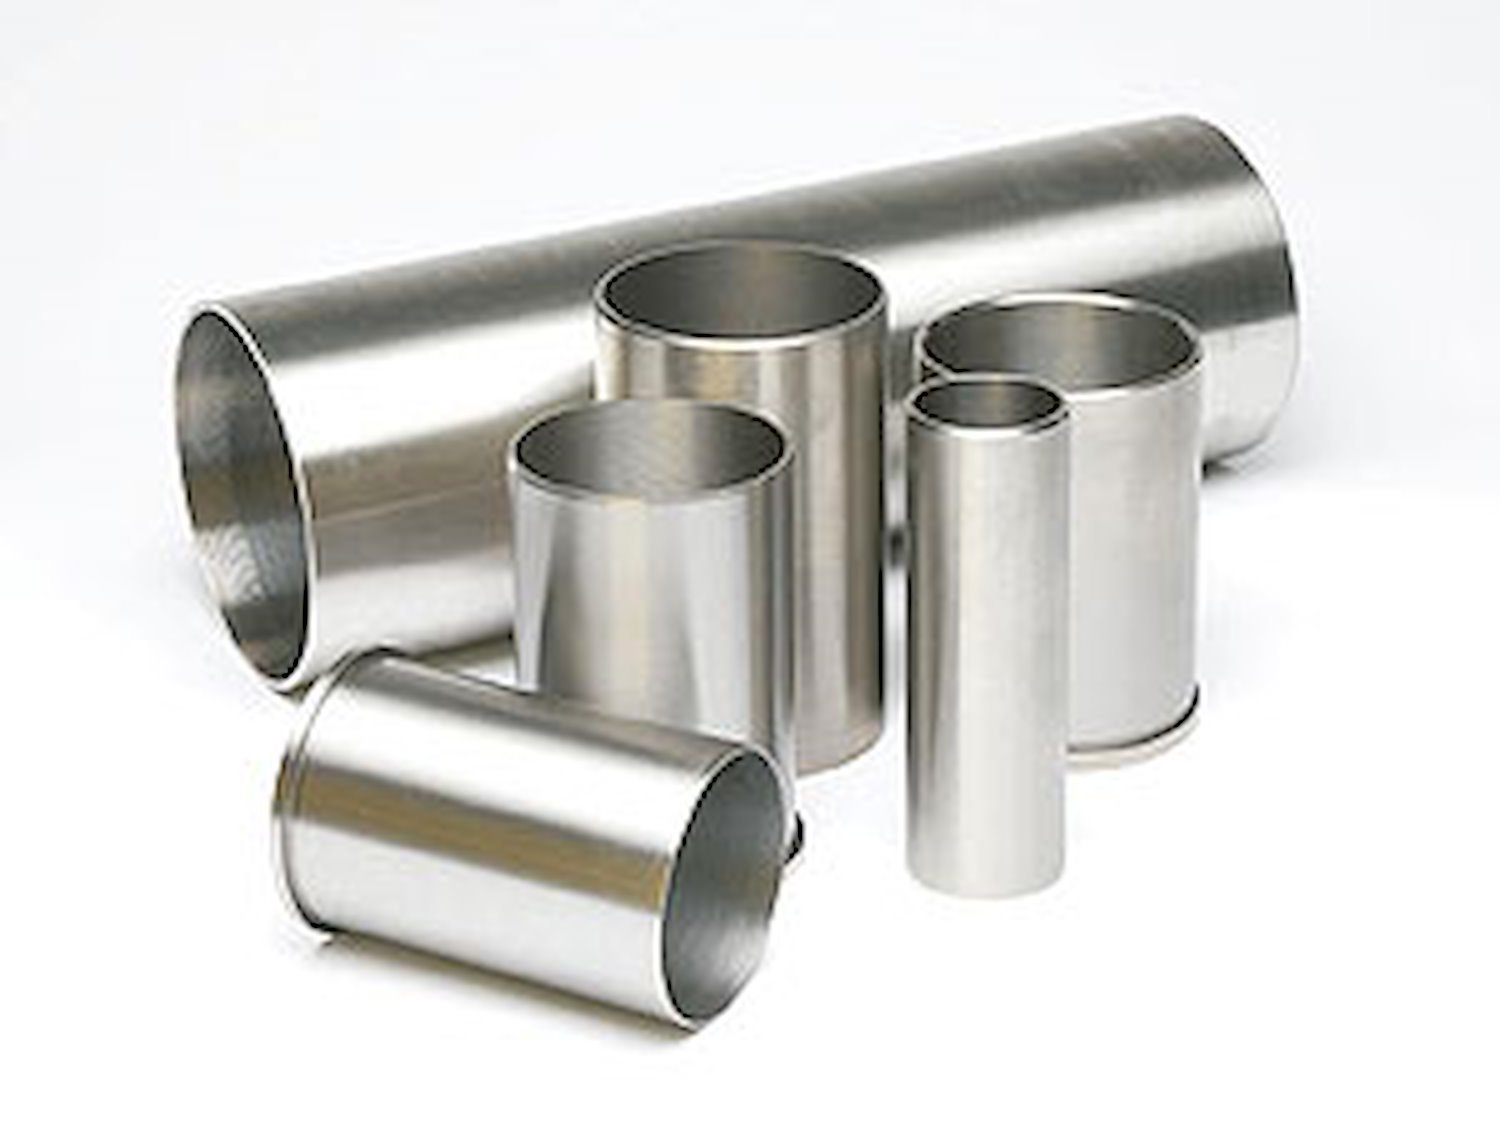 Cylinder Sleeve Bore: 3.1500" Length: 5-3/16" Wall Thickness: 1/8"